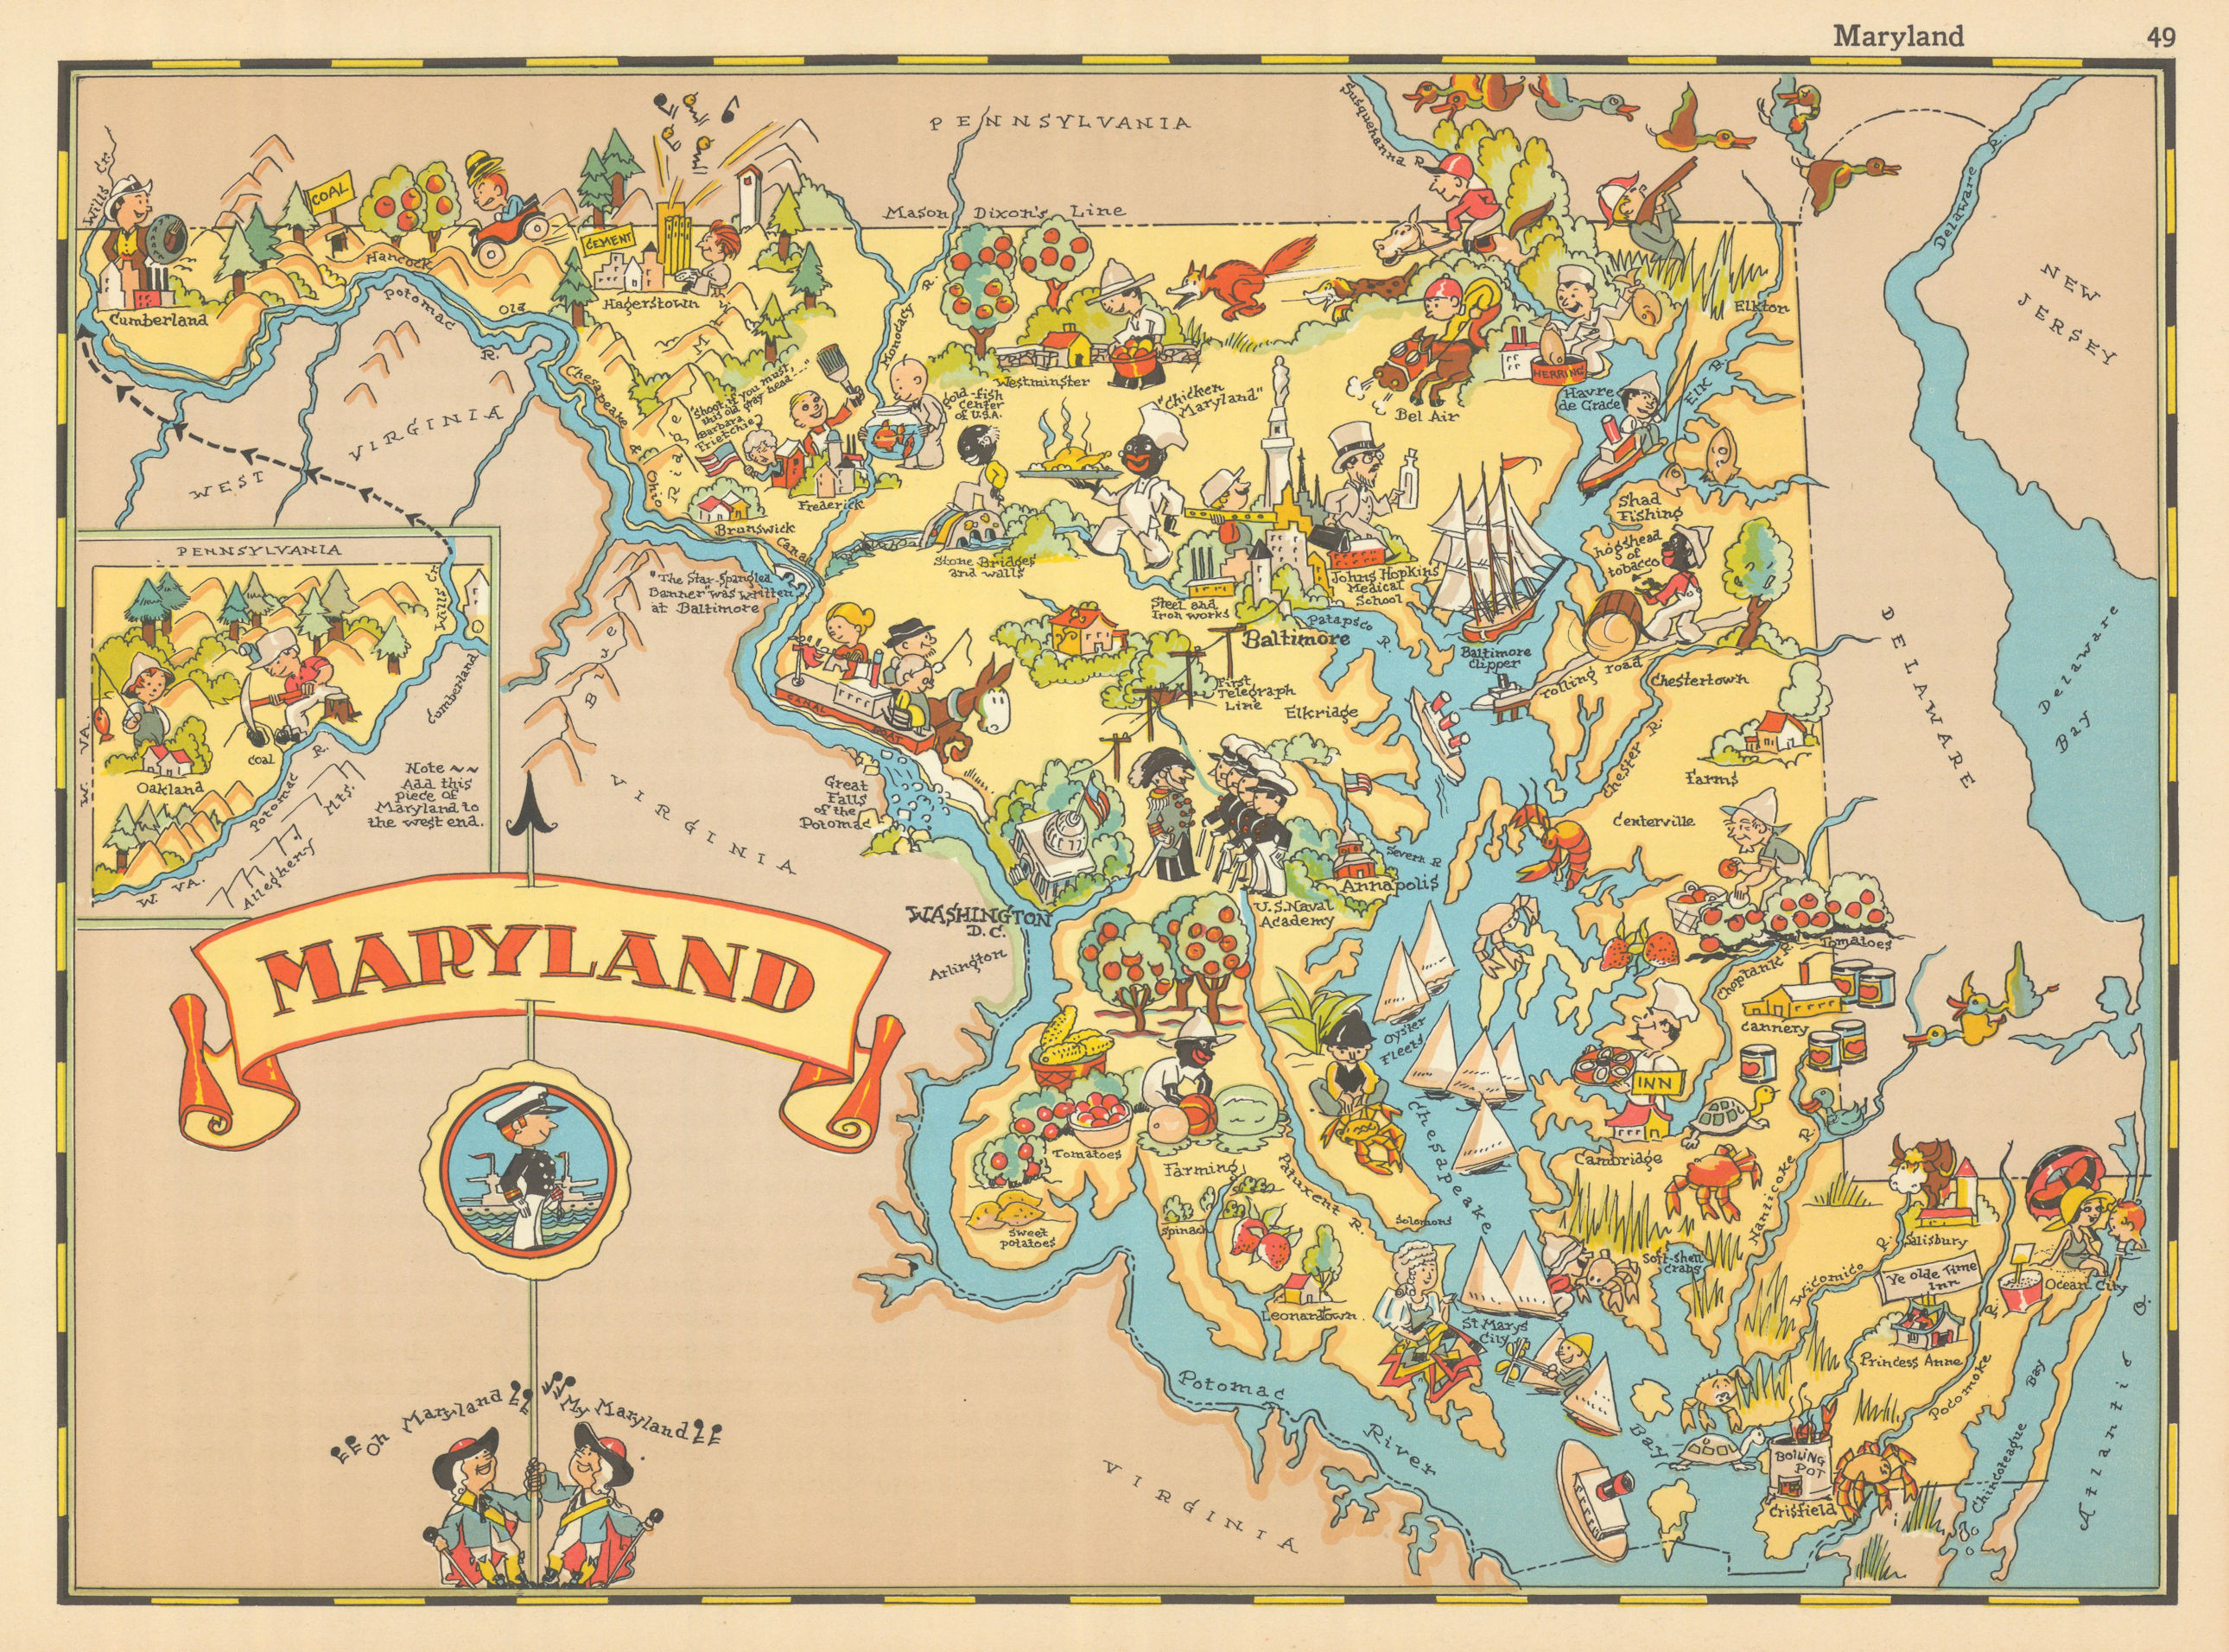 Associate Product Maryland. Pictorial state map by Ruth Taylor White 1935 old vintage chart